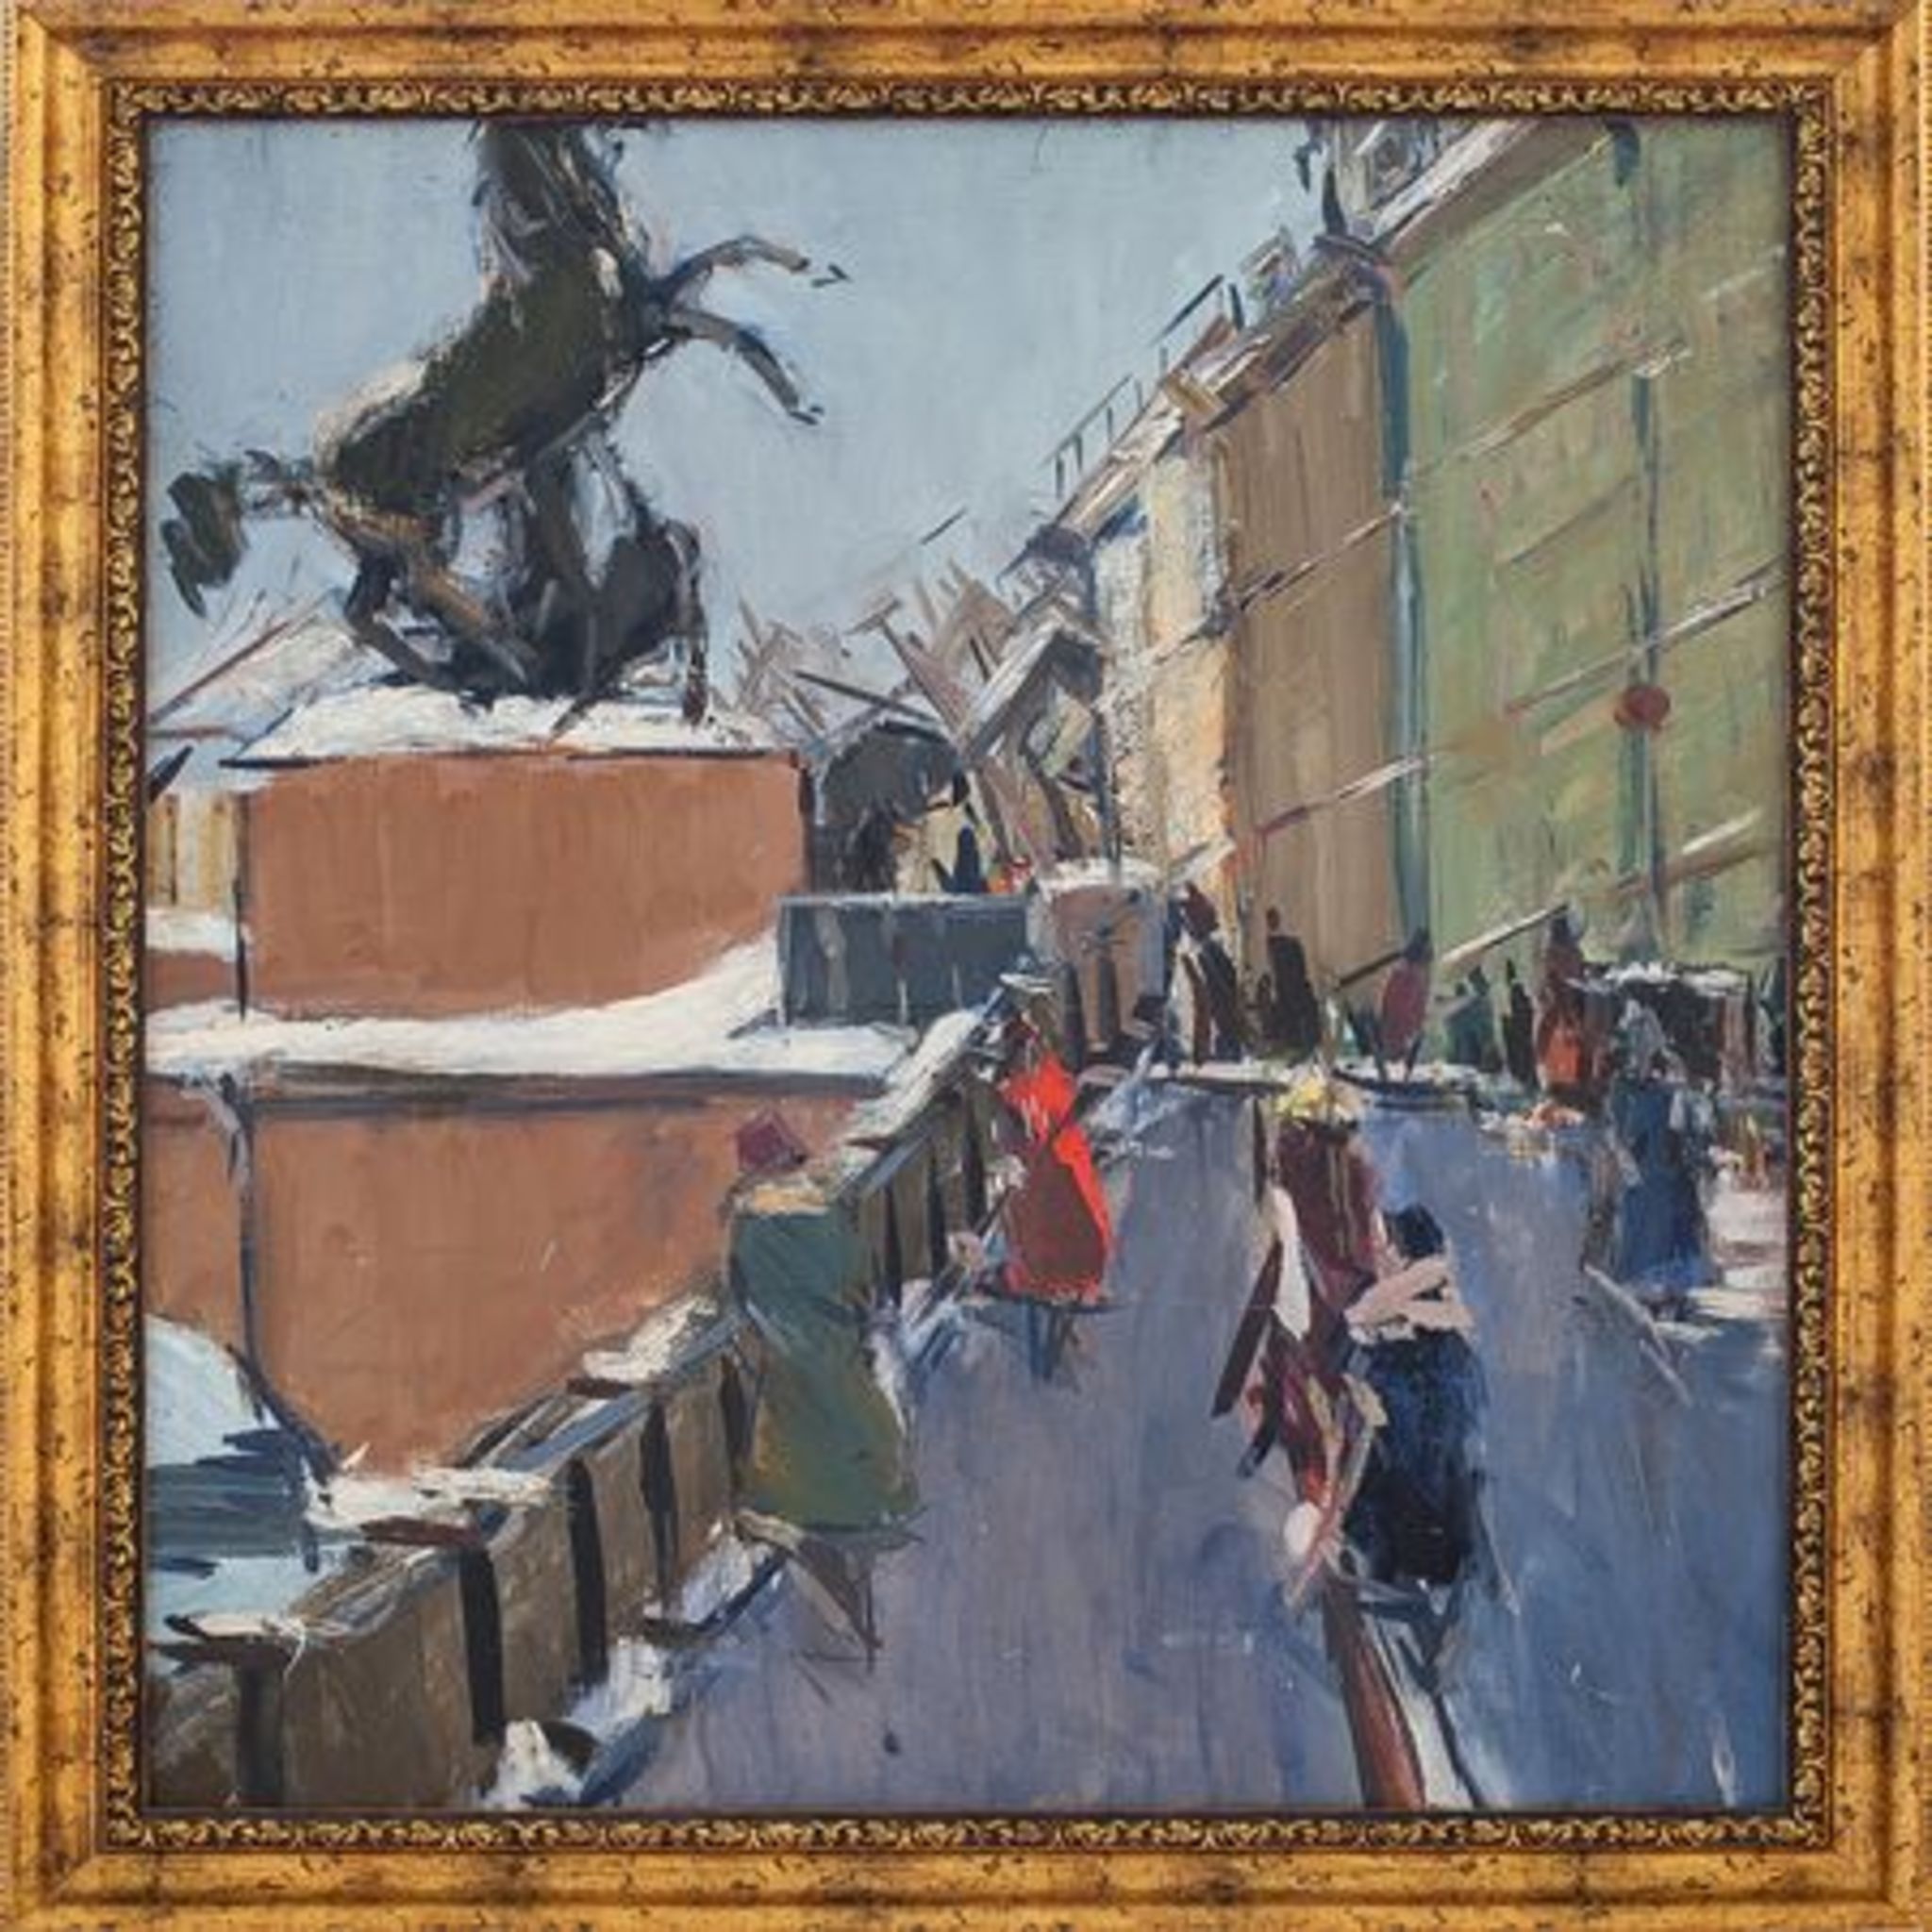 Presentation of the collection of art of the Soviet period, collected Michael Sasonko